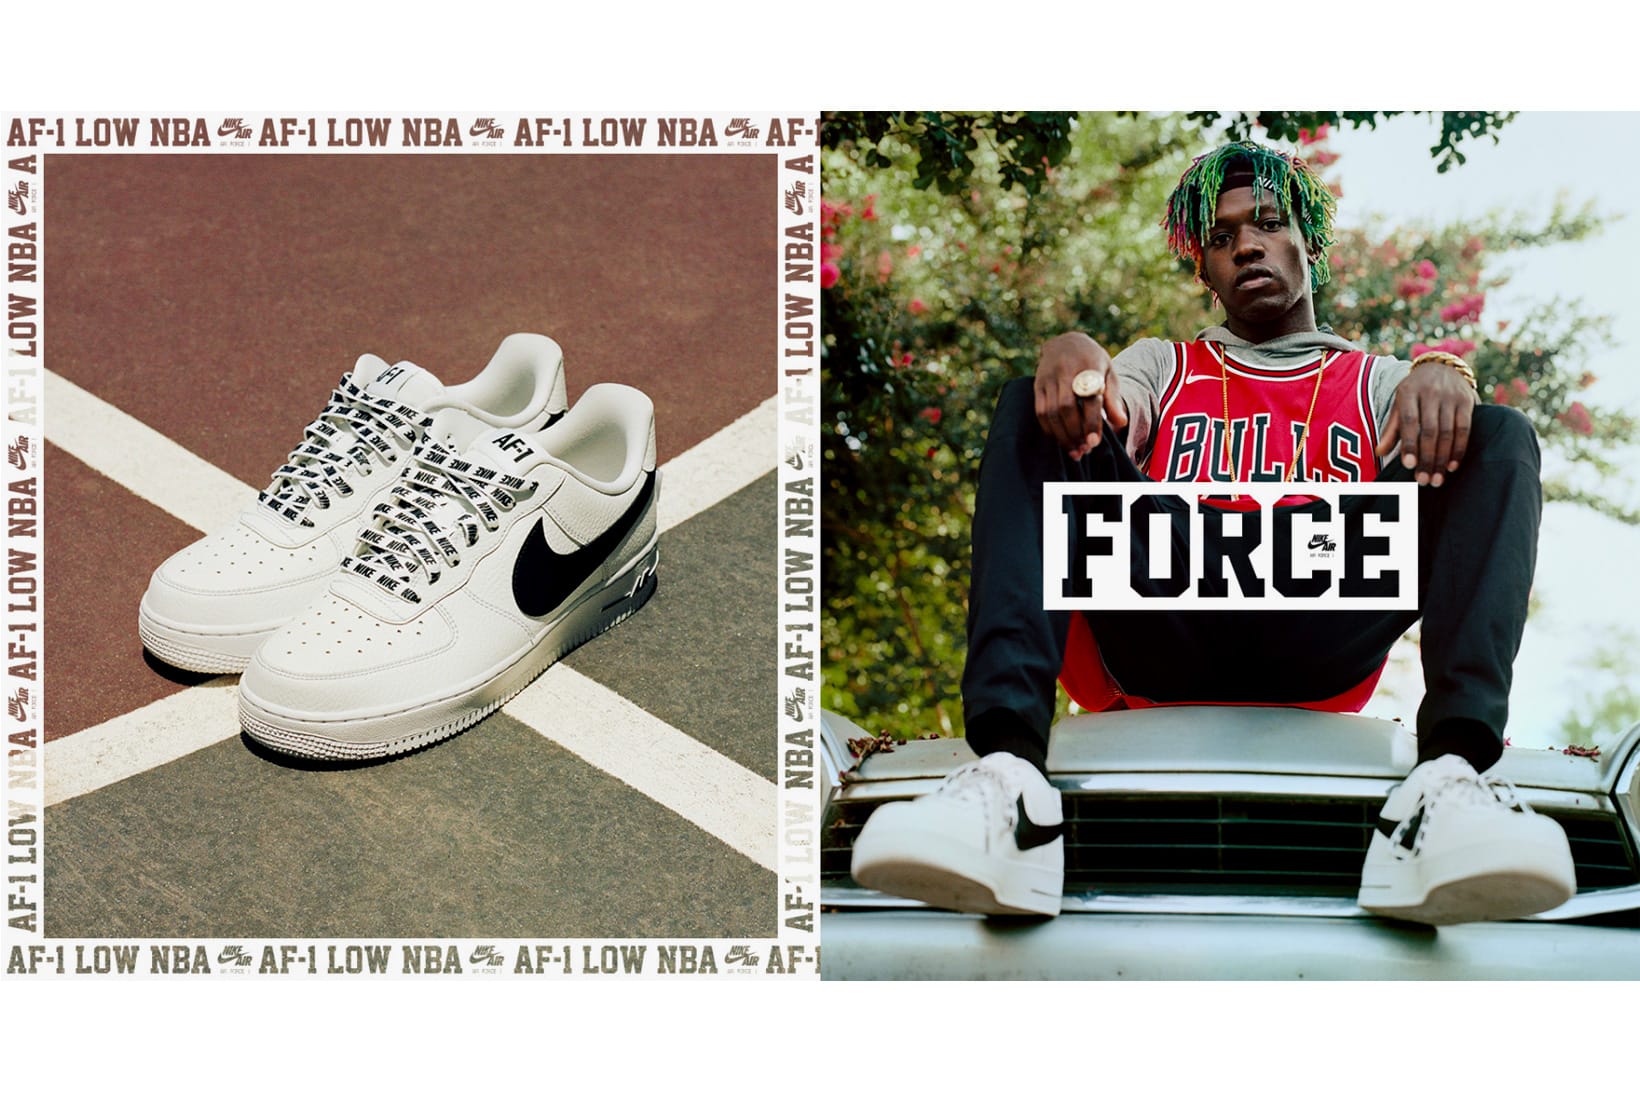 Nike Air Force 1 Low NBA Official Campaign | HYPEBEAST